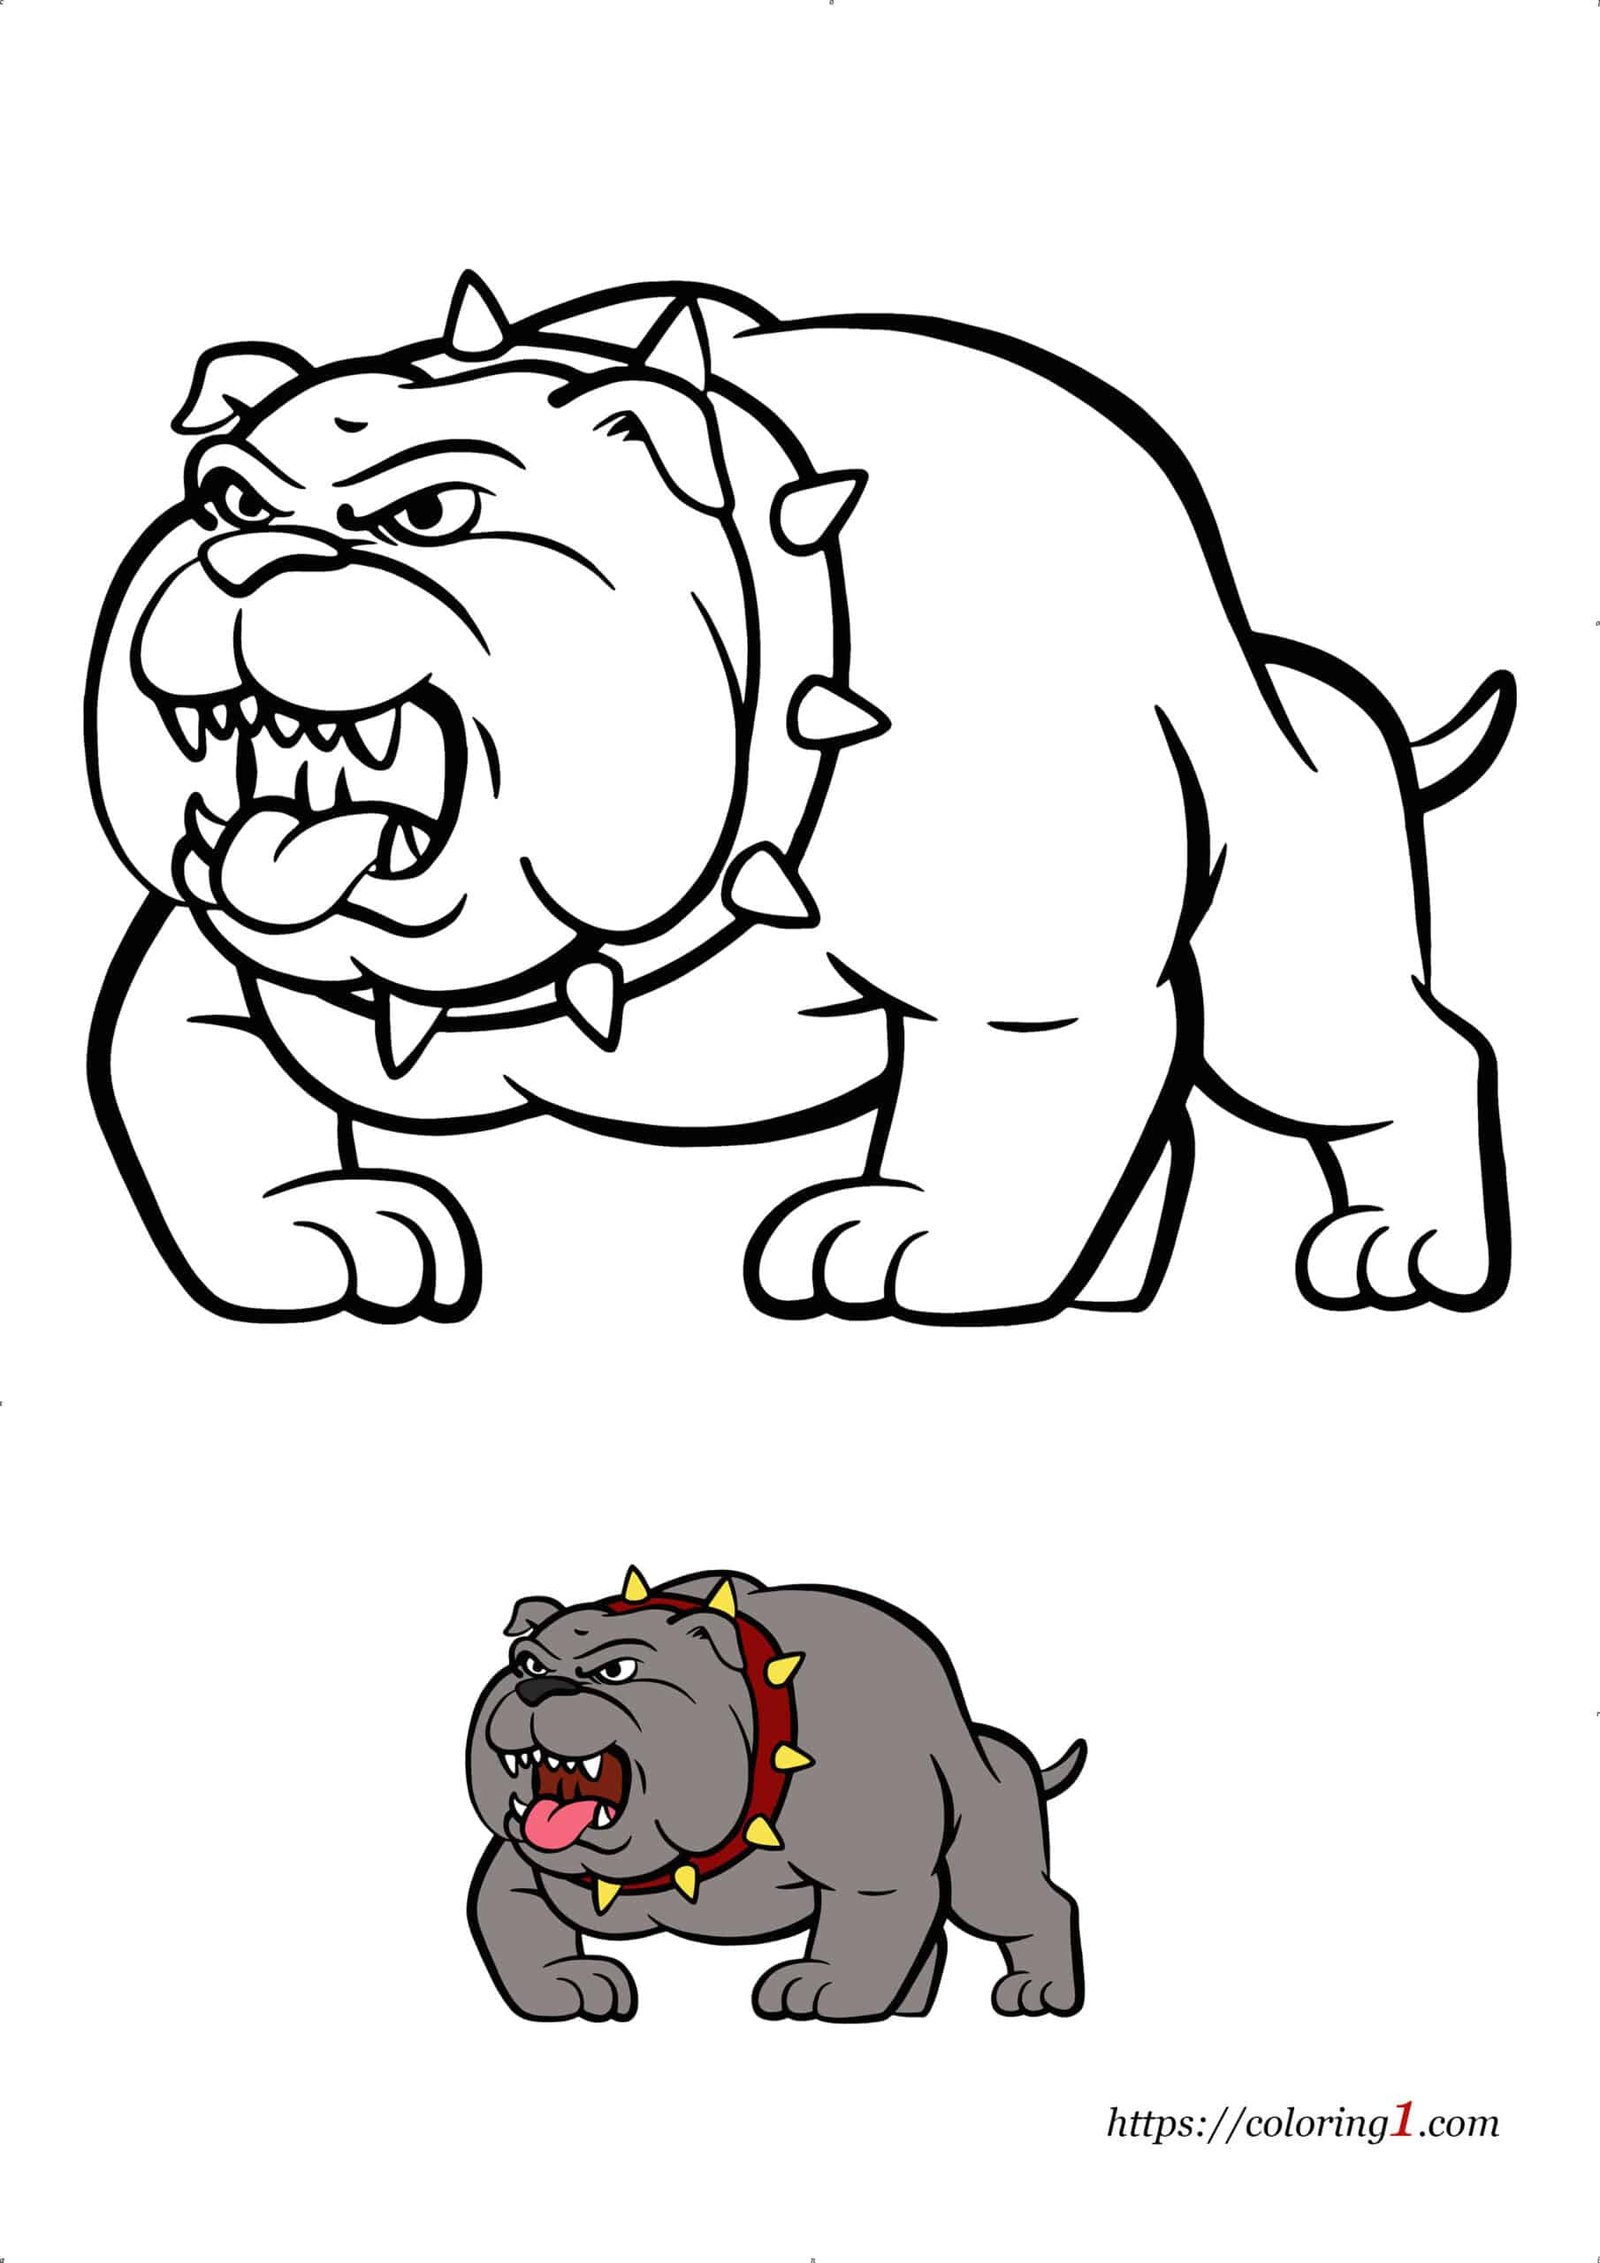 Bull Dog Breed coloring page to print with sample